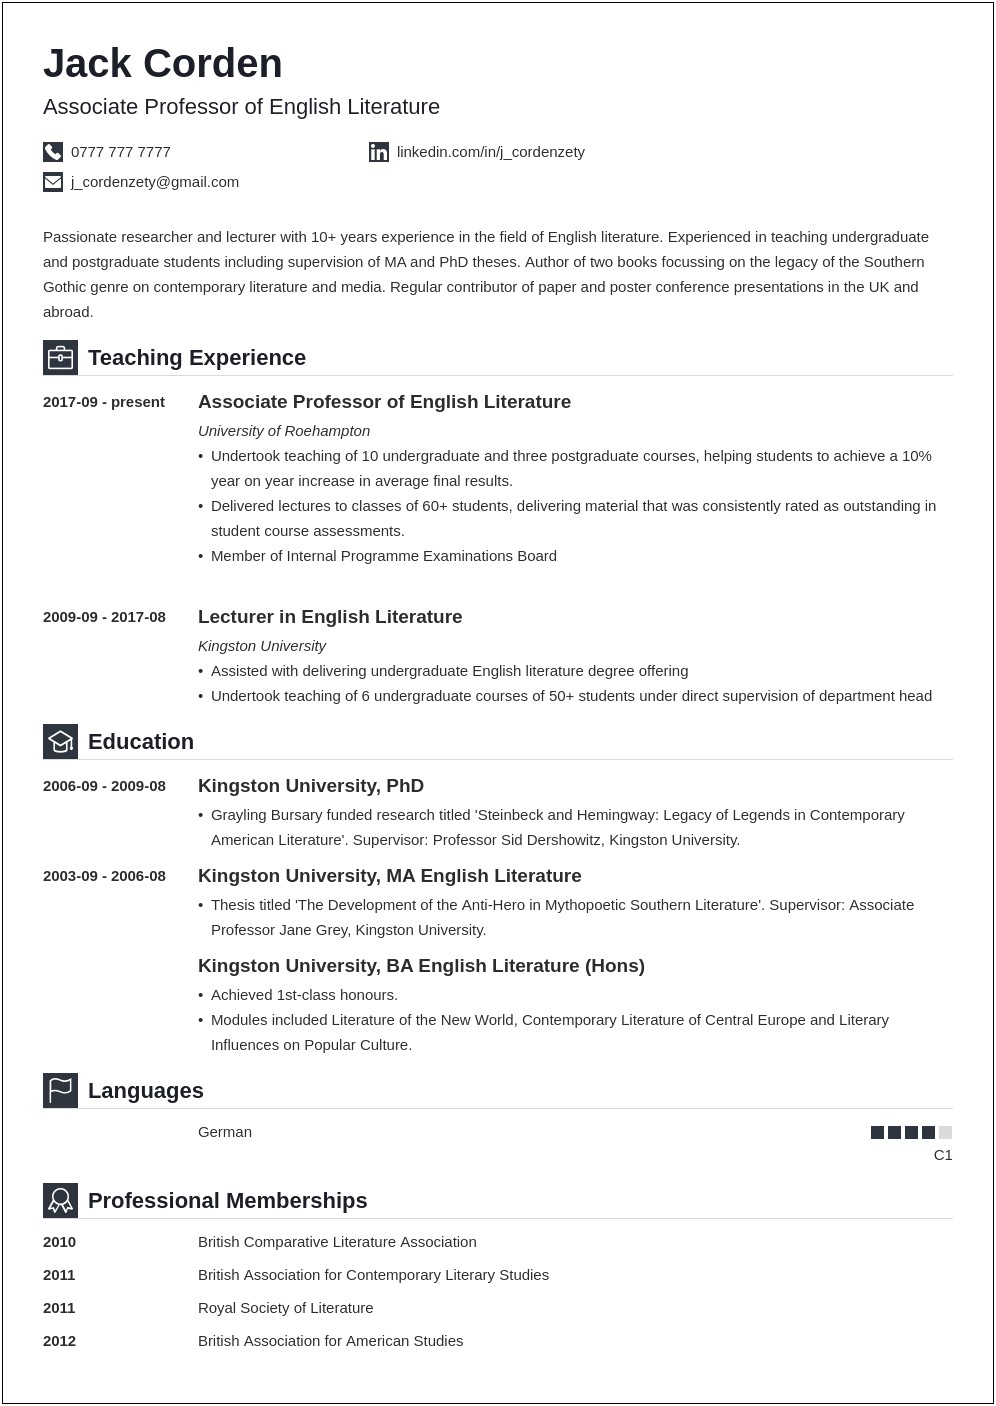 Sample Resume For College Applying Ms In Us